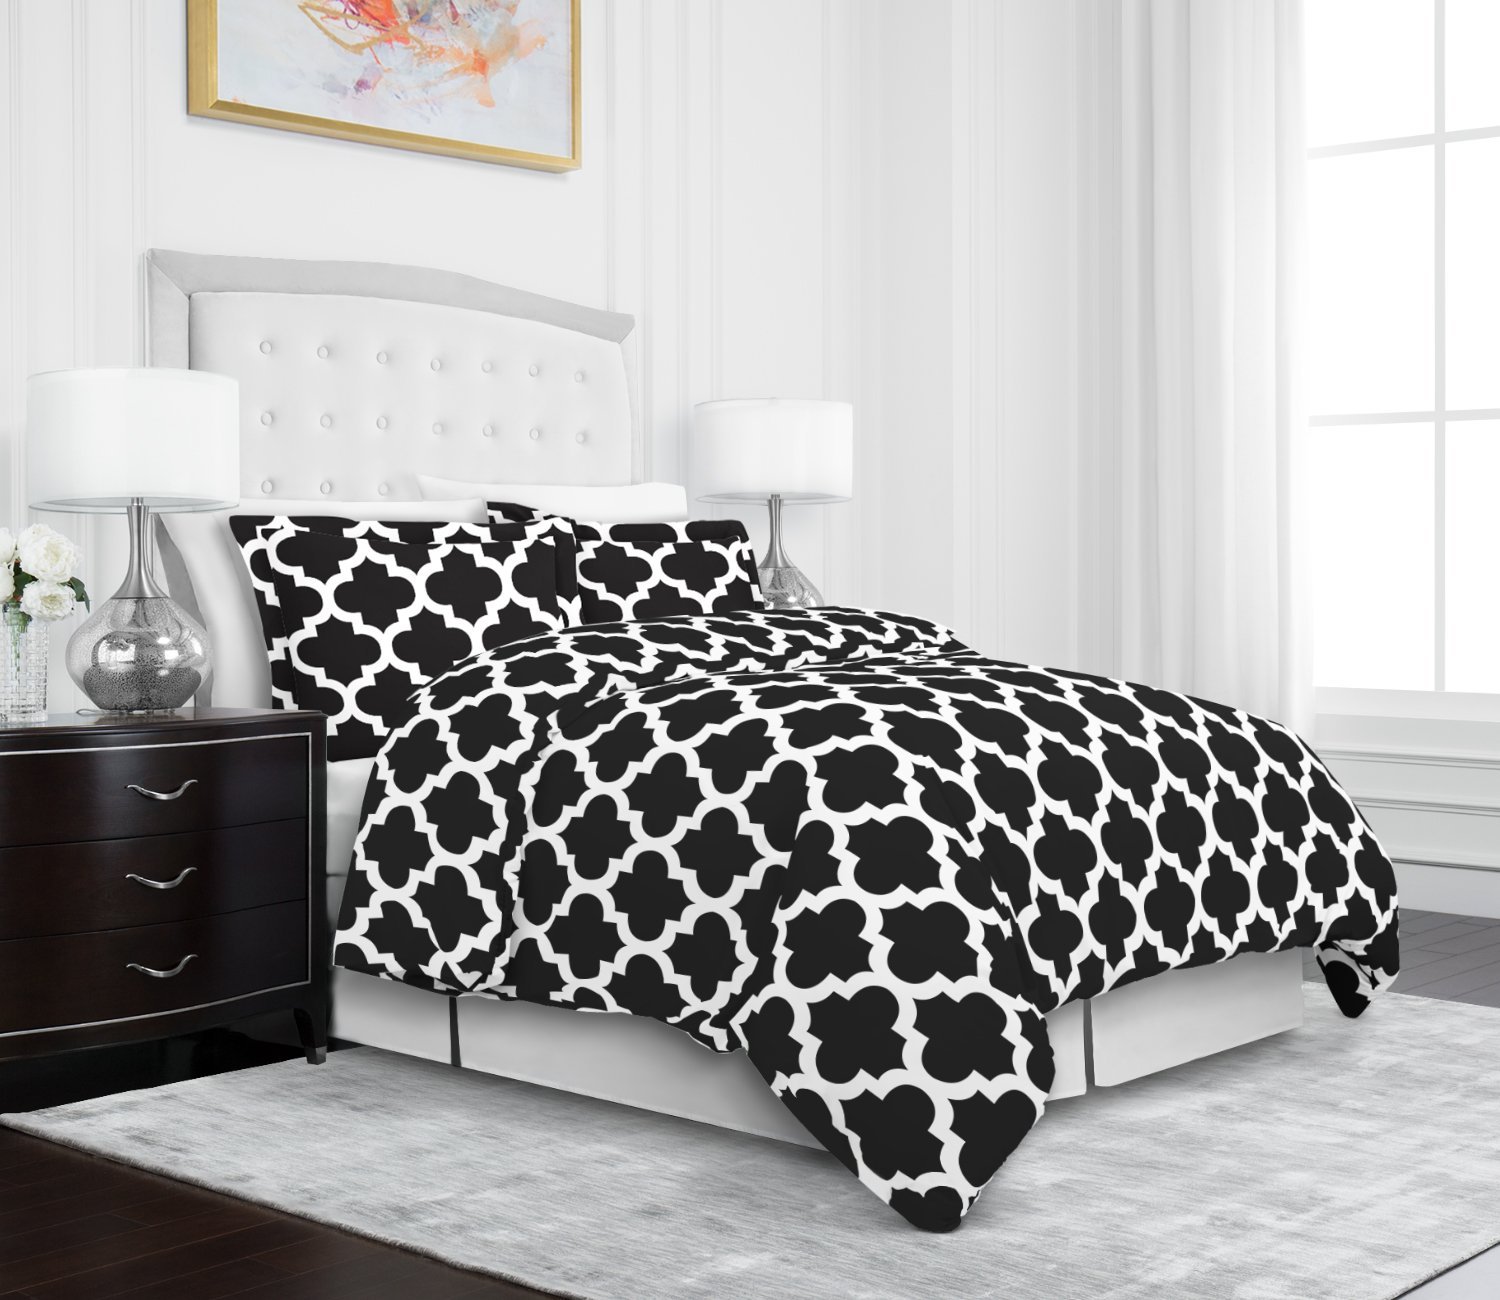 Egyptian Luxury Quatrefoil Duvet Cover Set - 3-Piece Ultra Soft Double Brushed Microfiber Printed Cover with Shams - Full/Queen - Black/White